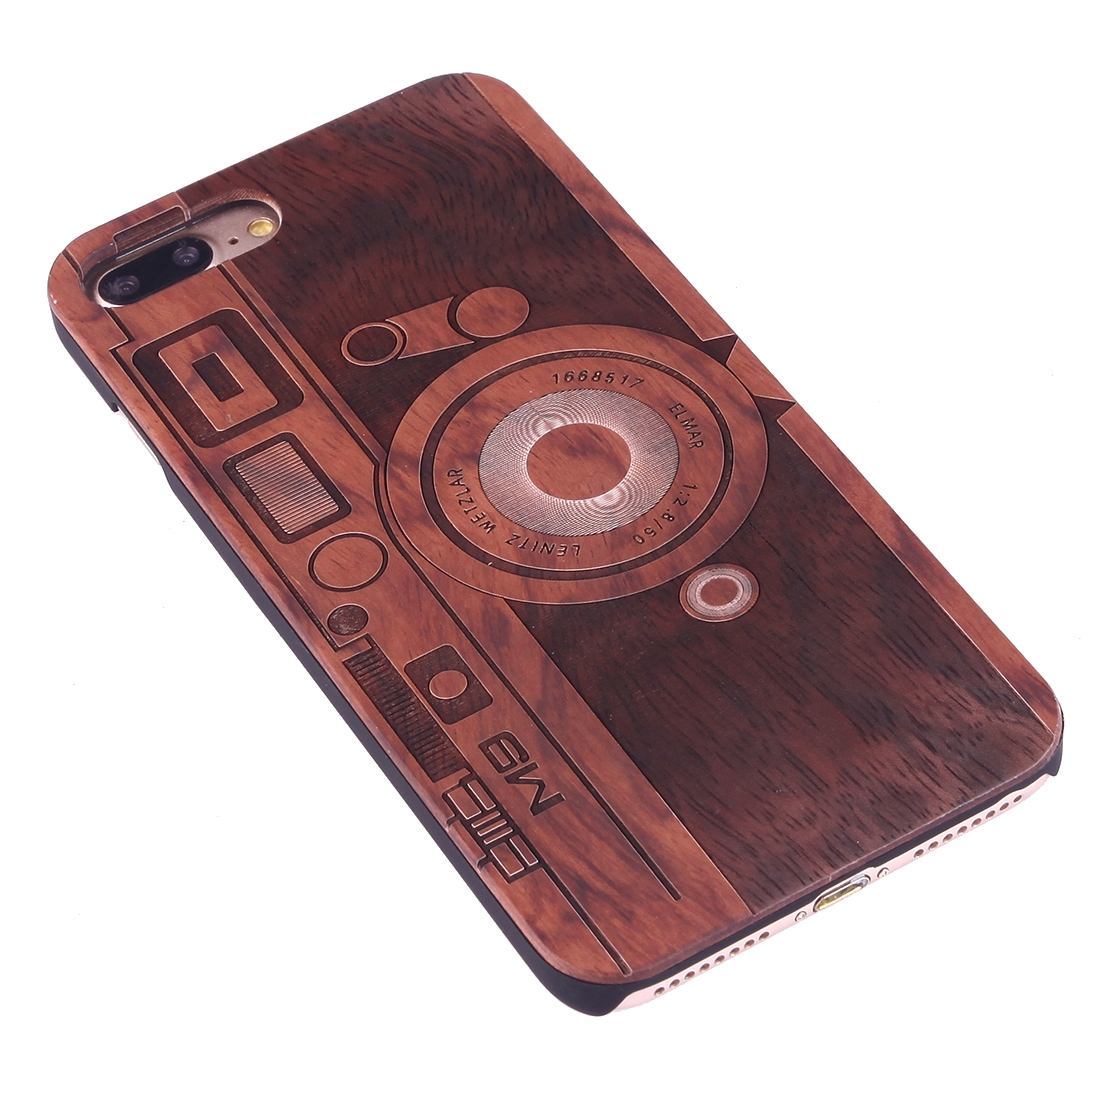 For iPhone 8 PLUS,7 PLUS Case,Rosewood M9 Camera Wooden Durable Protective Cover